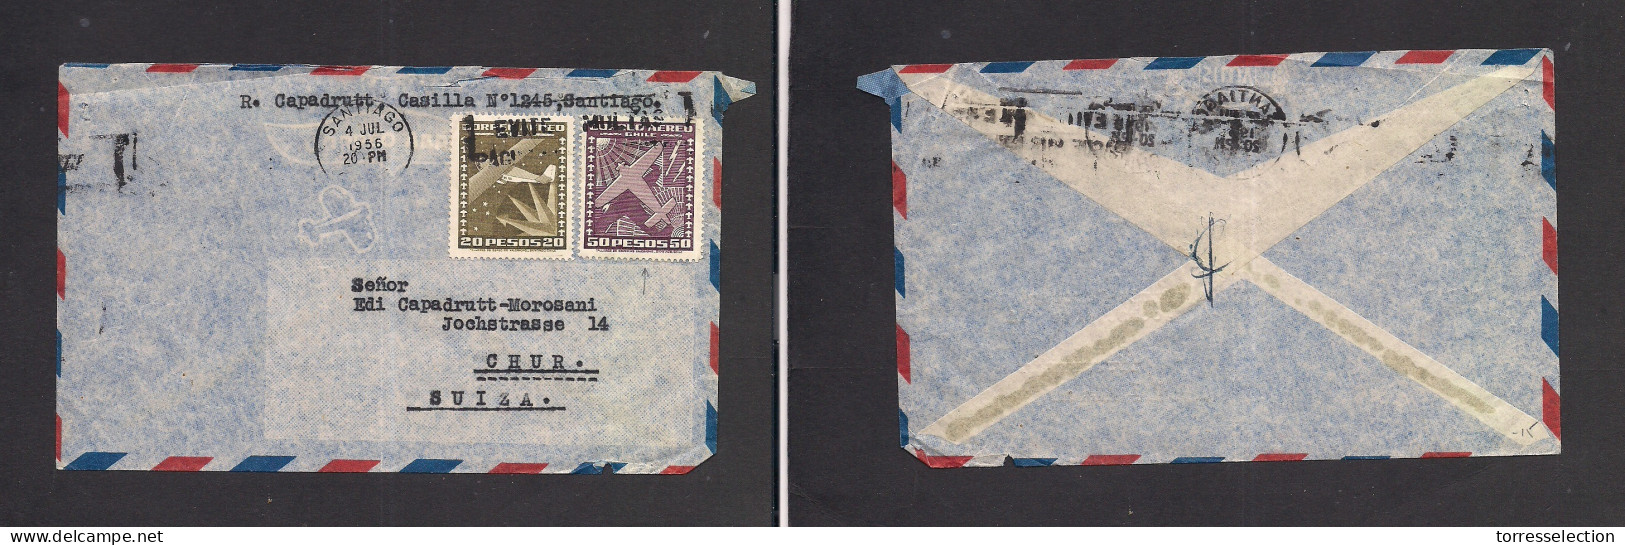 Chile - XX. 1955 (4 July) Santiago - Switzerland, Chur. Air Multifkd Env At 70 Pesos Rate Incl 50p Stamp. Fine. XSALE. - Chile